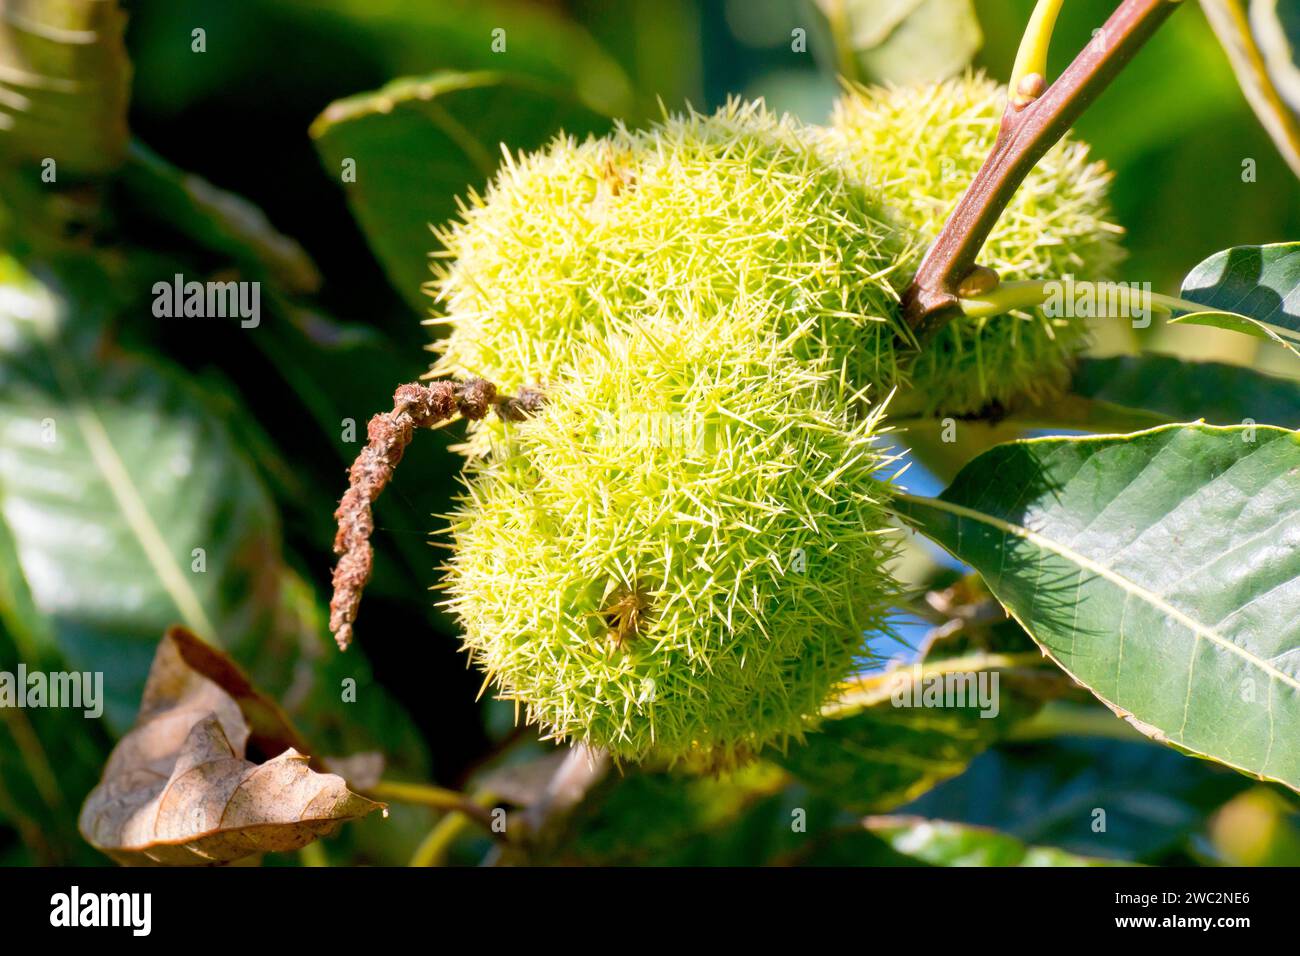 Sweet Chestnut or Spanish Chestnut (castanea sativa), close up of the spiky fruits hanging from a branch of a tree in the autumn sunshine. Stock Photo